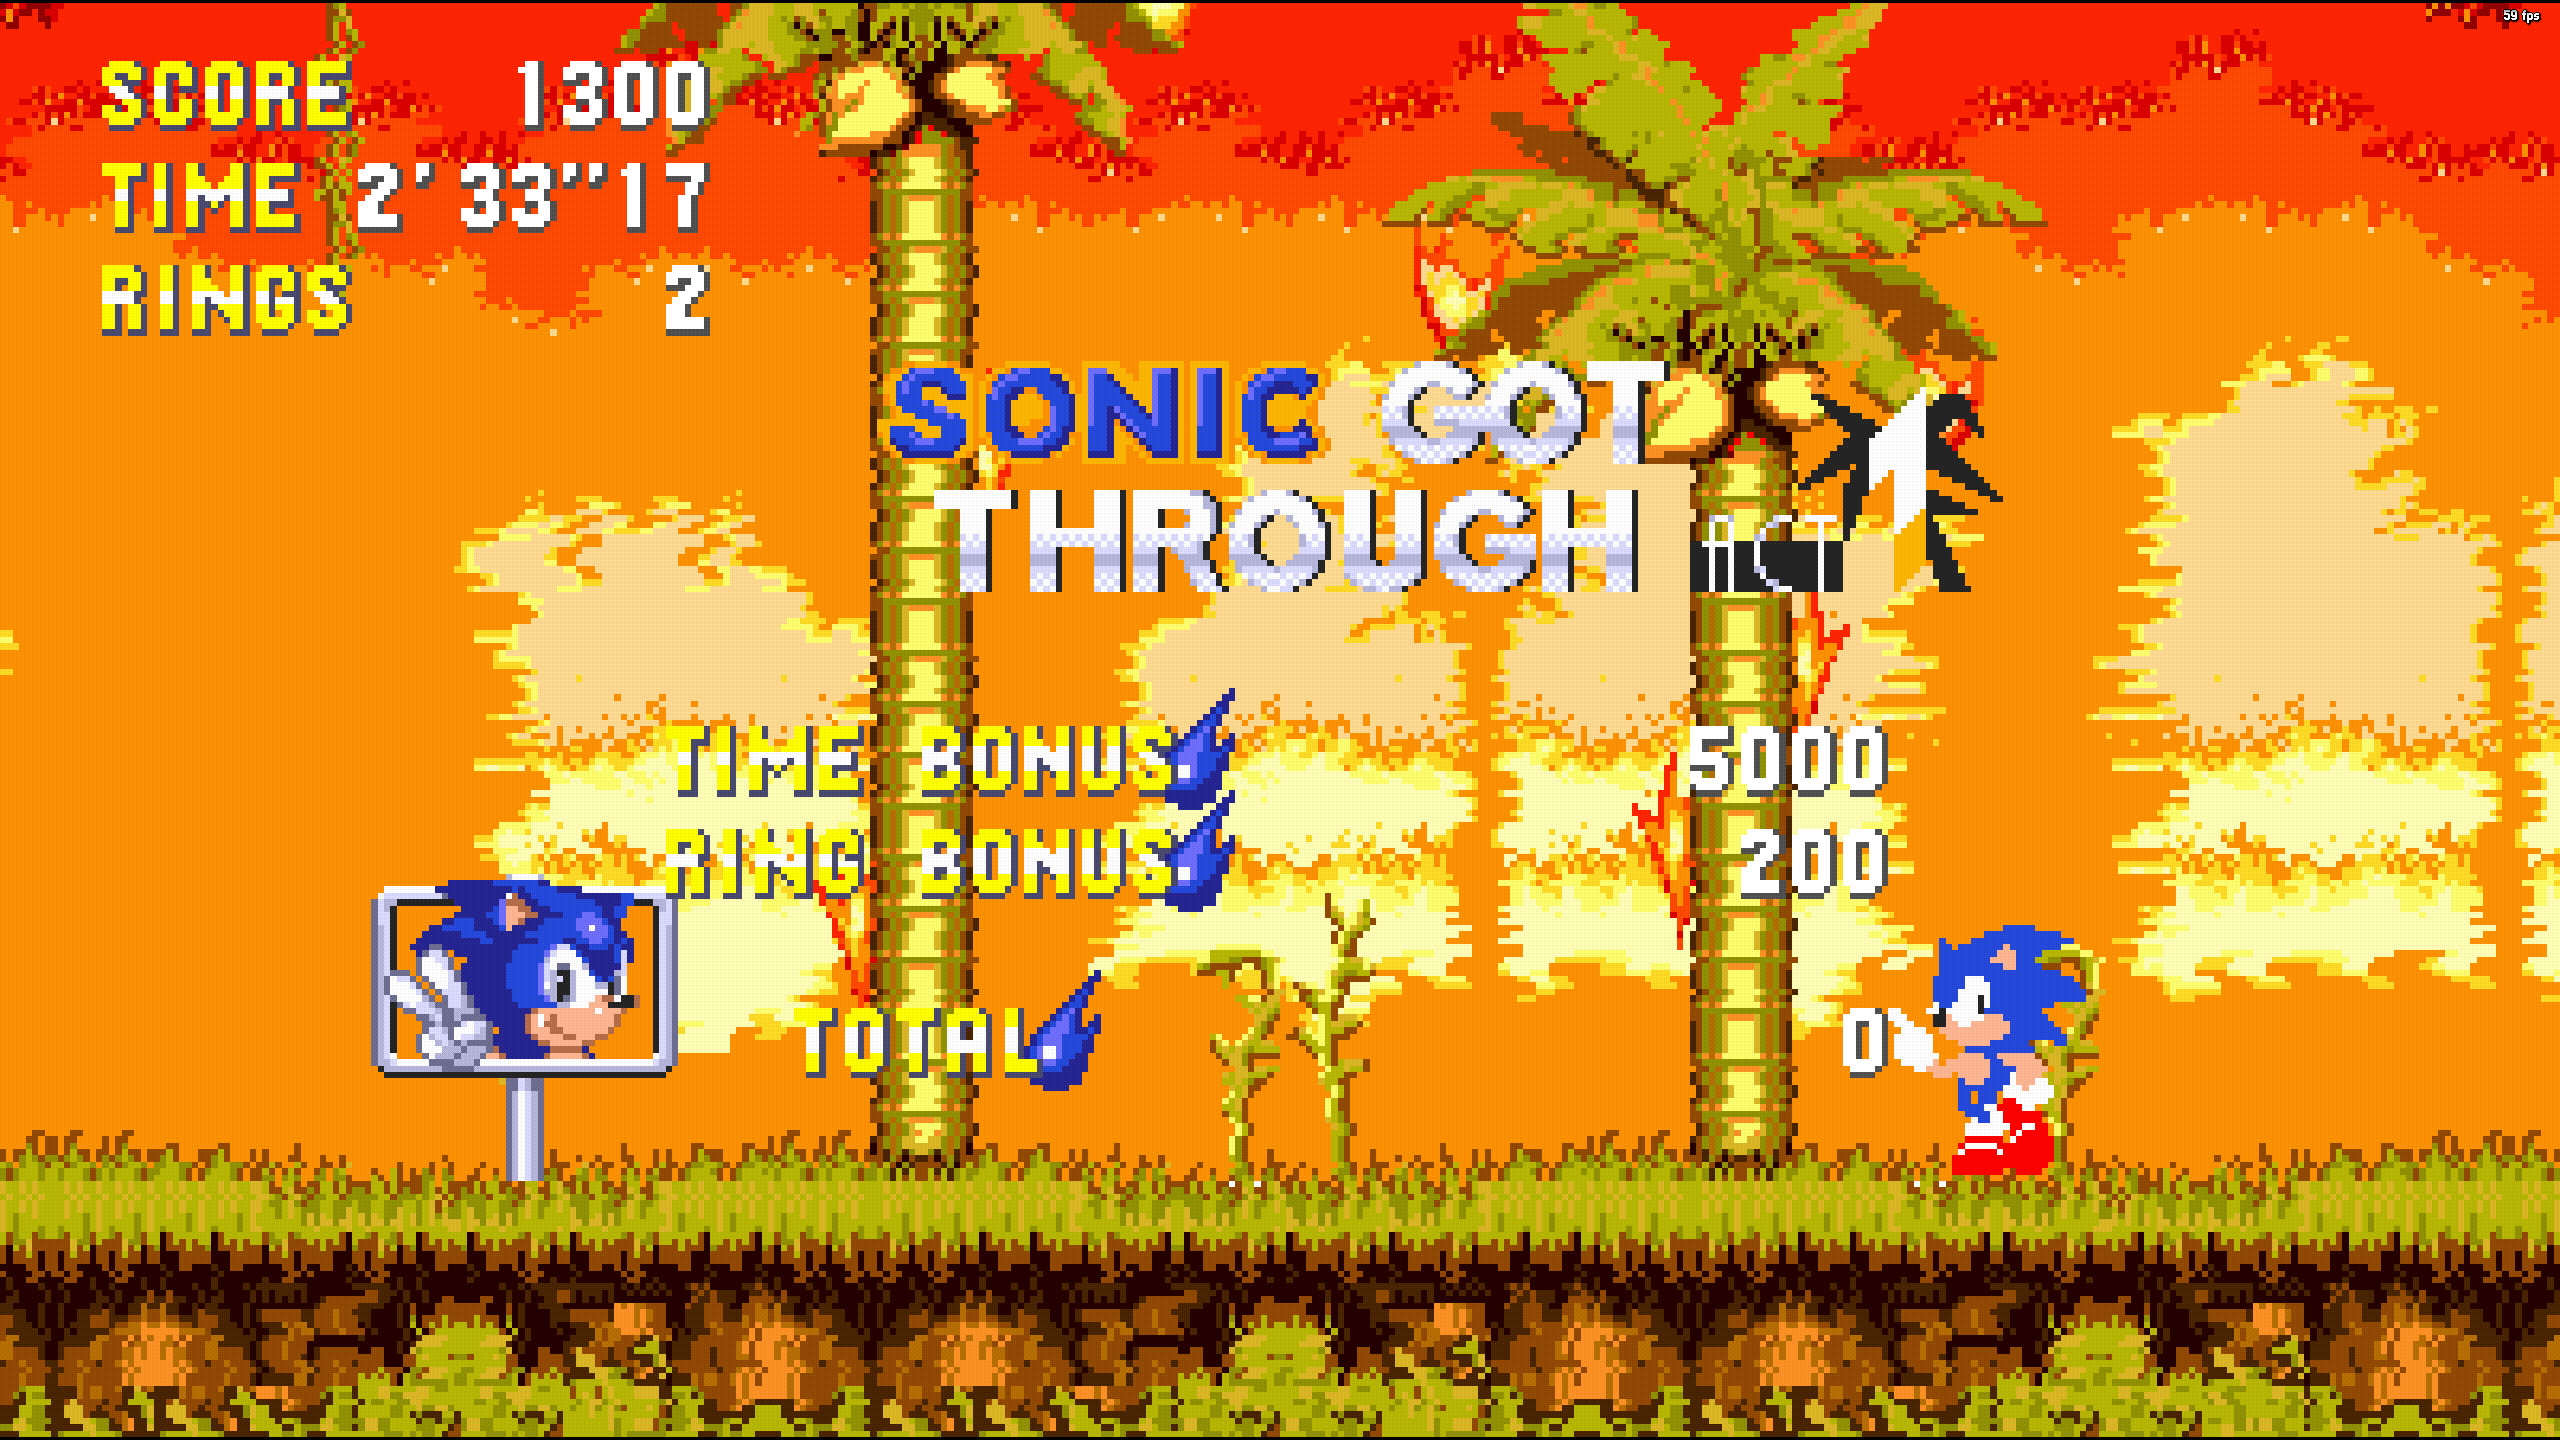 Sonic 3 air knuckles. Sonic 3 Air. Sonic 3 a.i.r. (Angel Island revisited). Sonic 3 Air Mods. Моды на Соник 3 a.i.r.